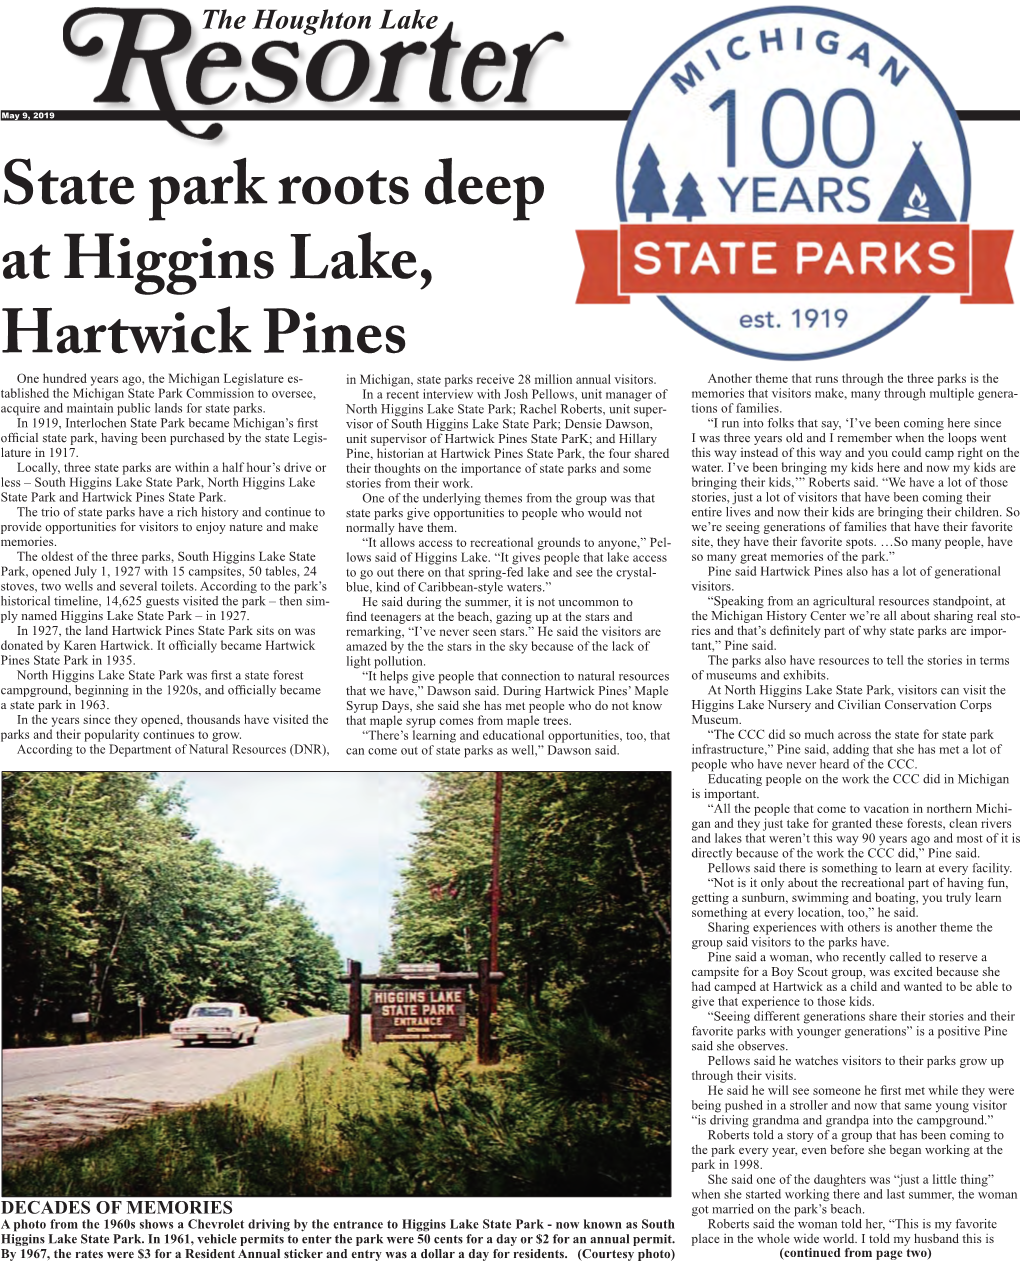 State Park Roots Deep at Higgins Lake, Hartwick Pines